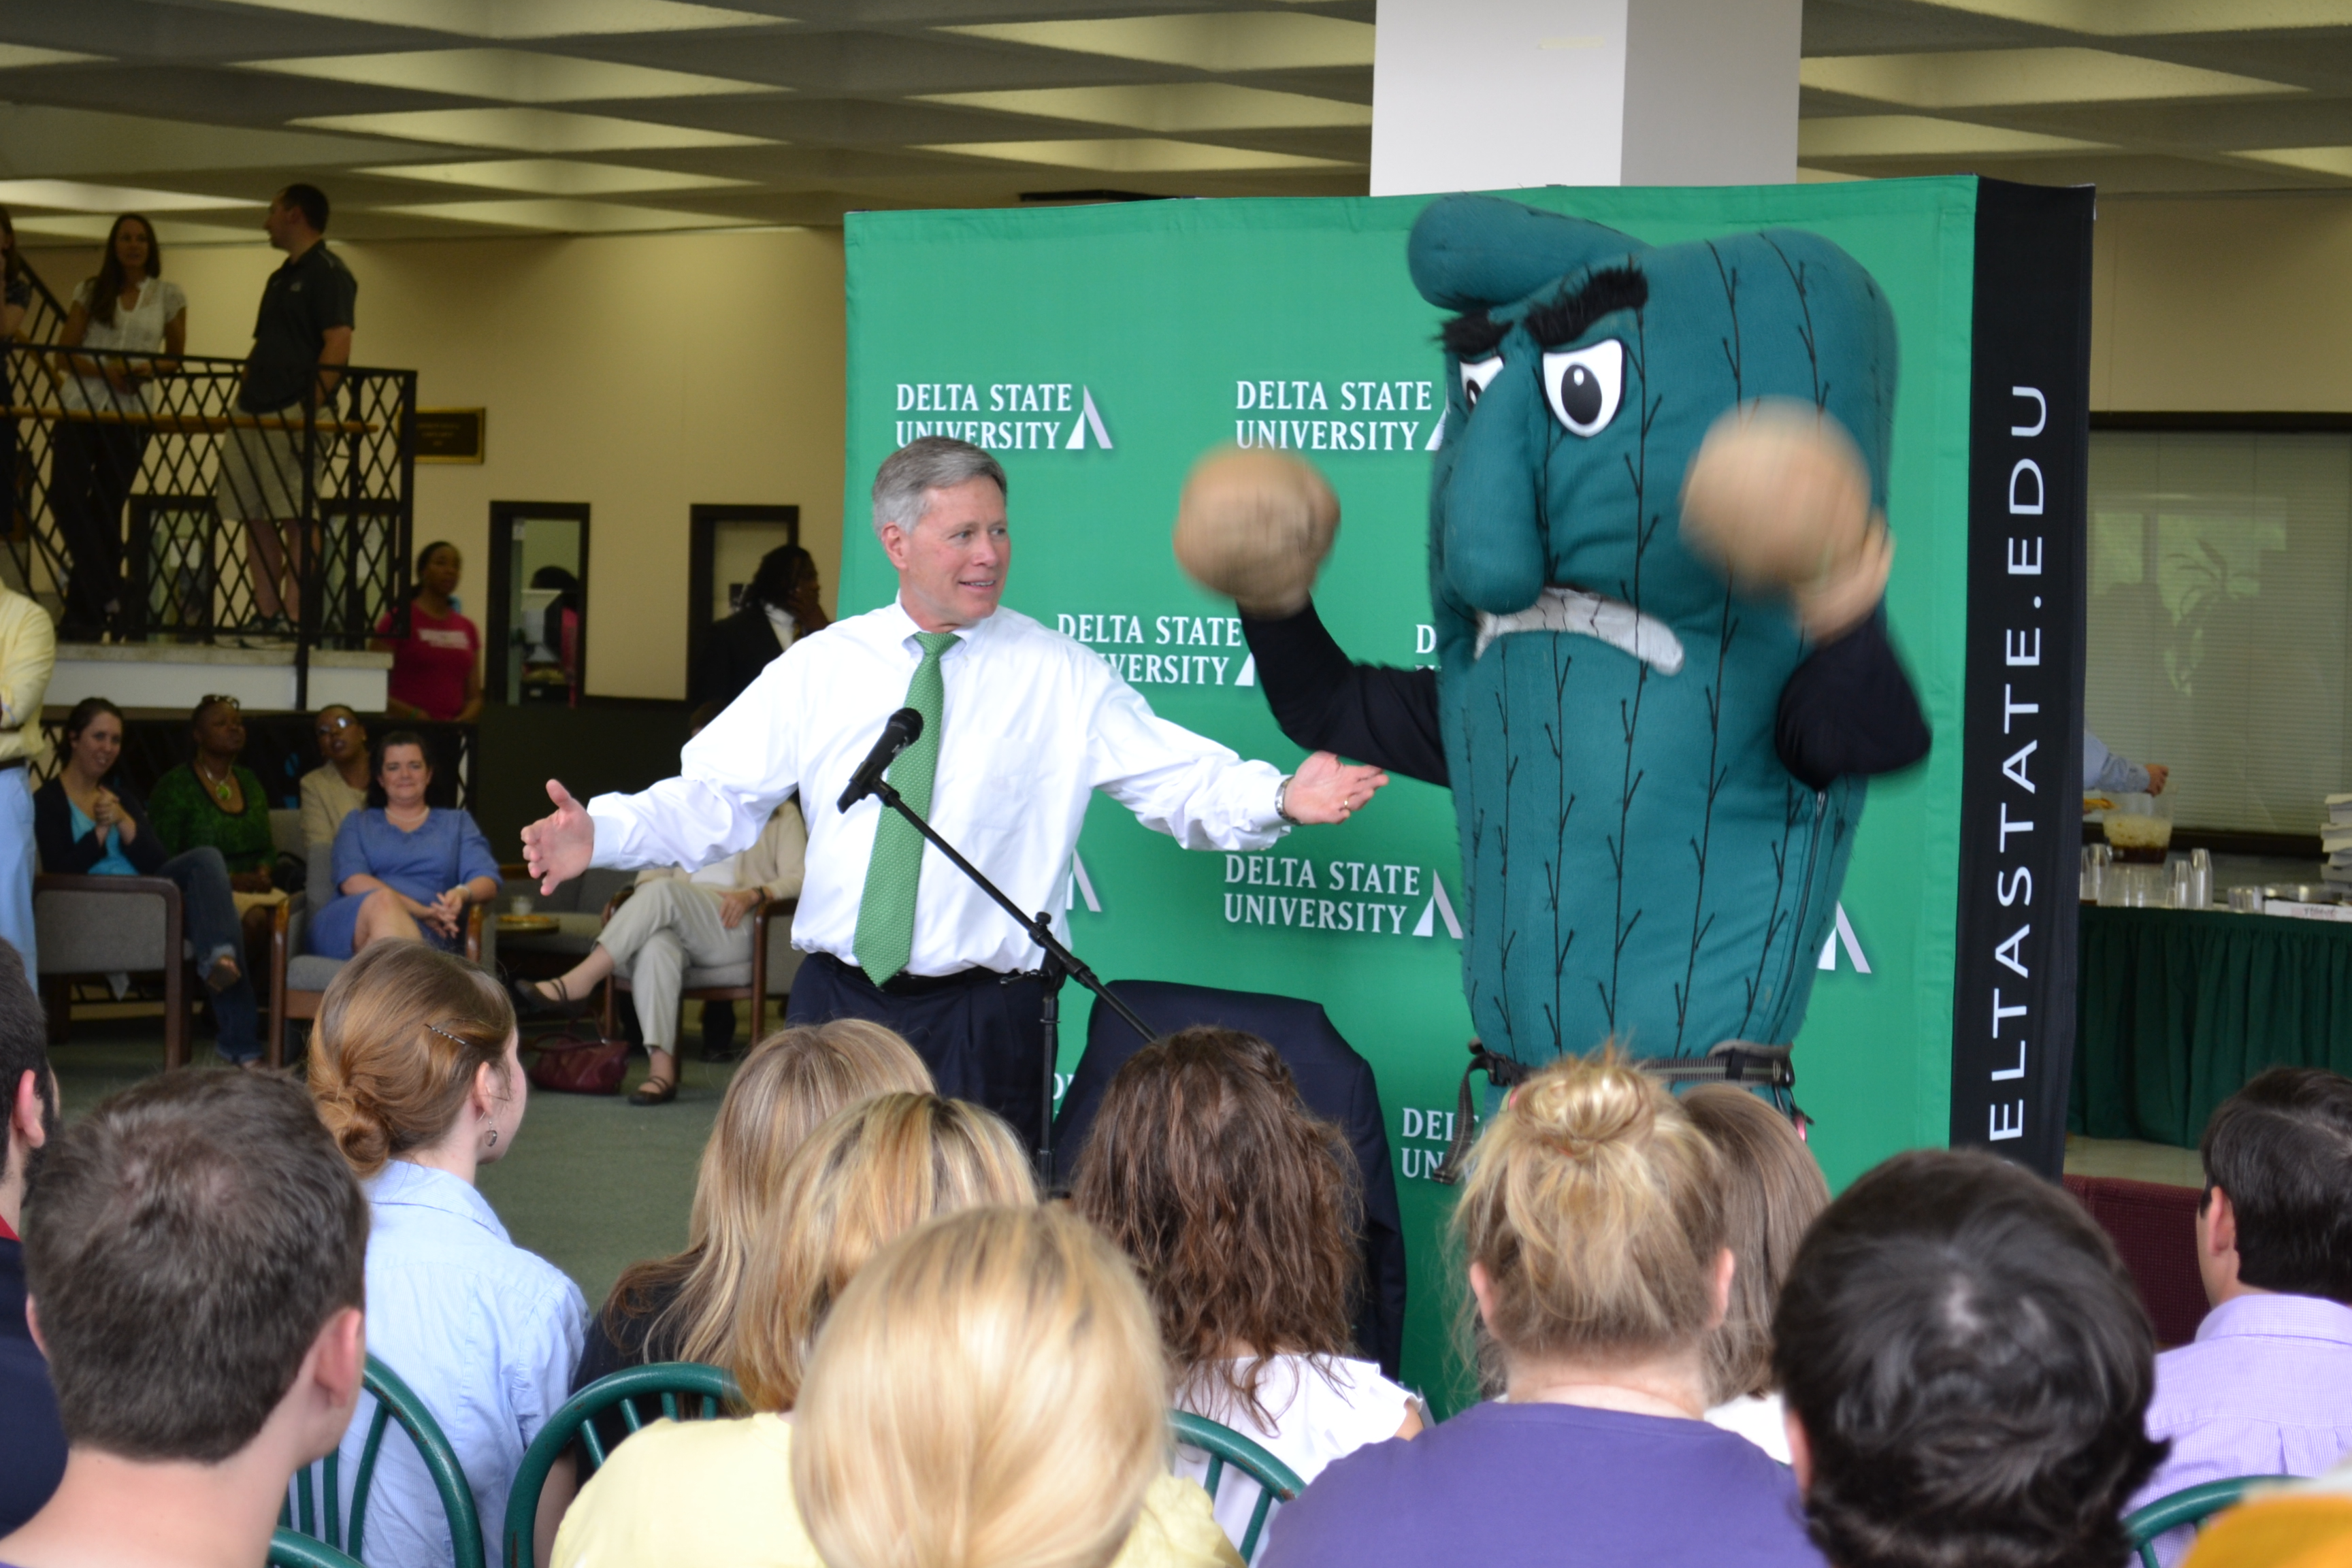 Delta State President William N. LaForge and the Fighting Okra are all “smiles” as the flash mob concludes.